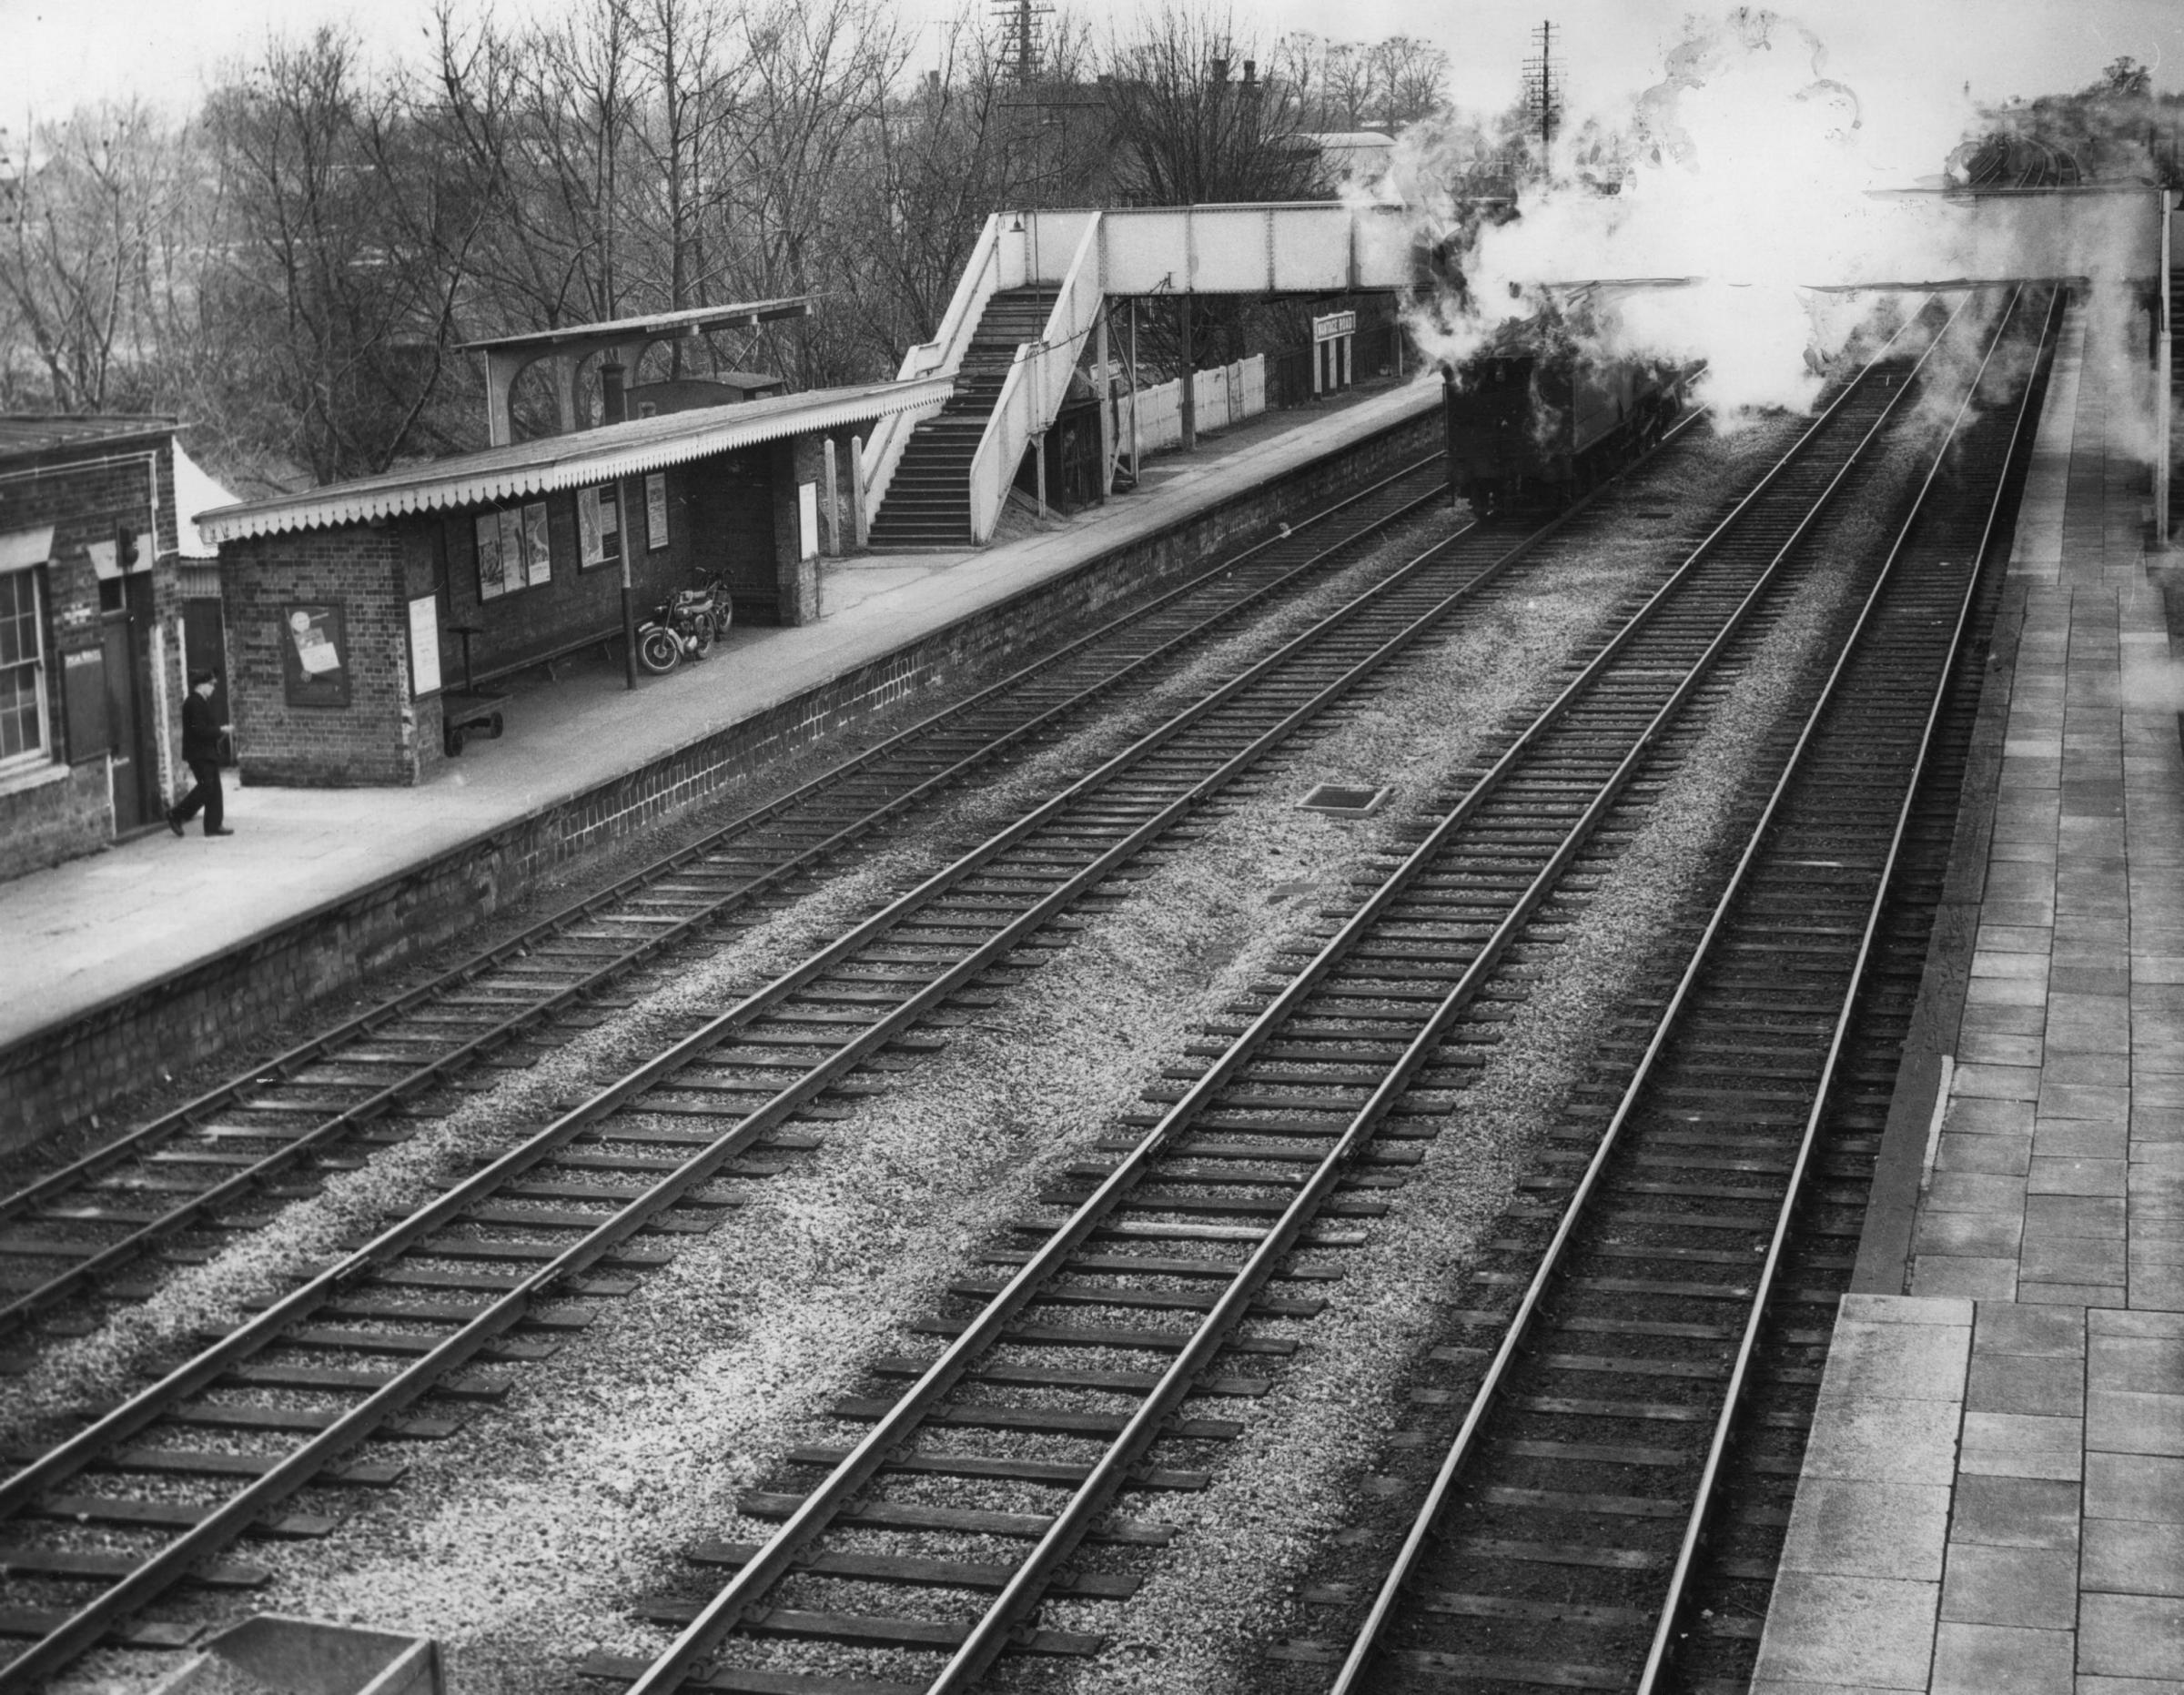 Wantage Road Station in March 1963